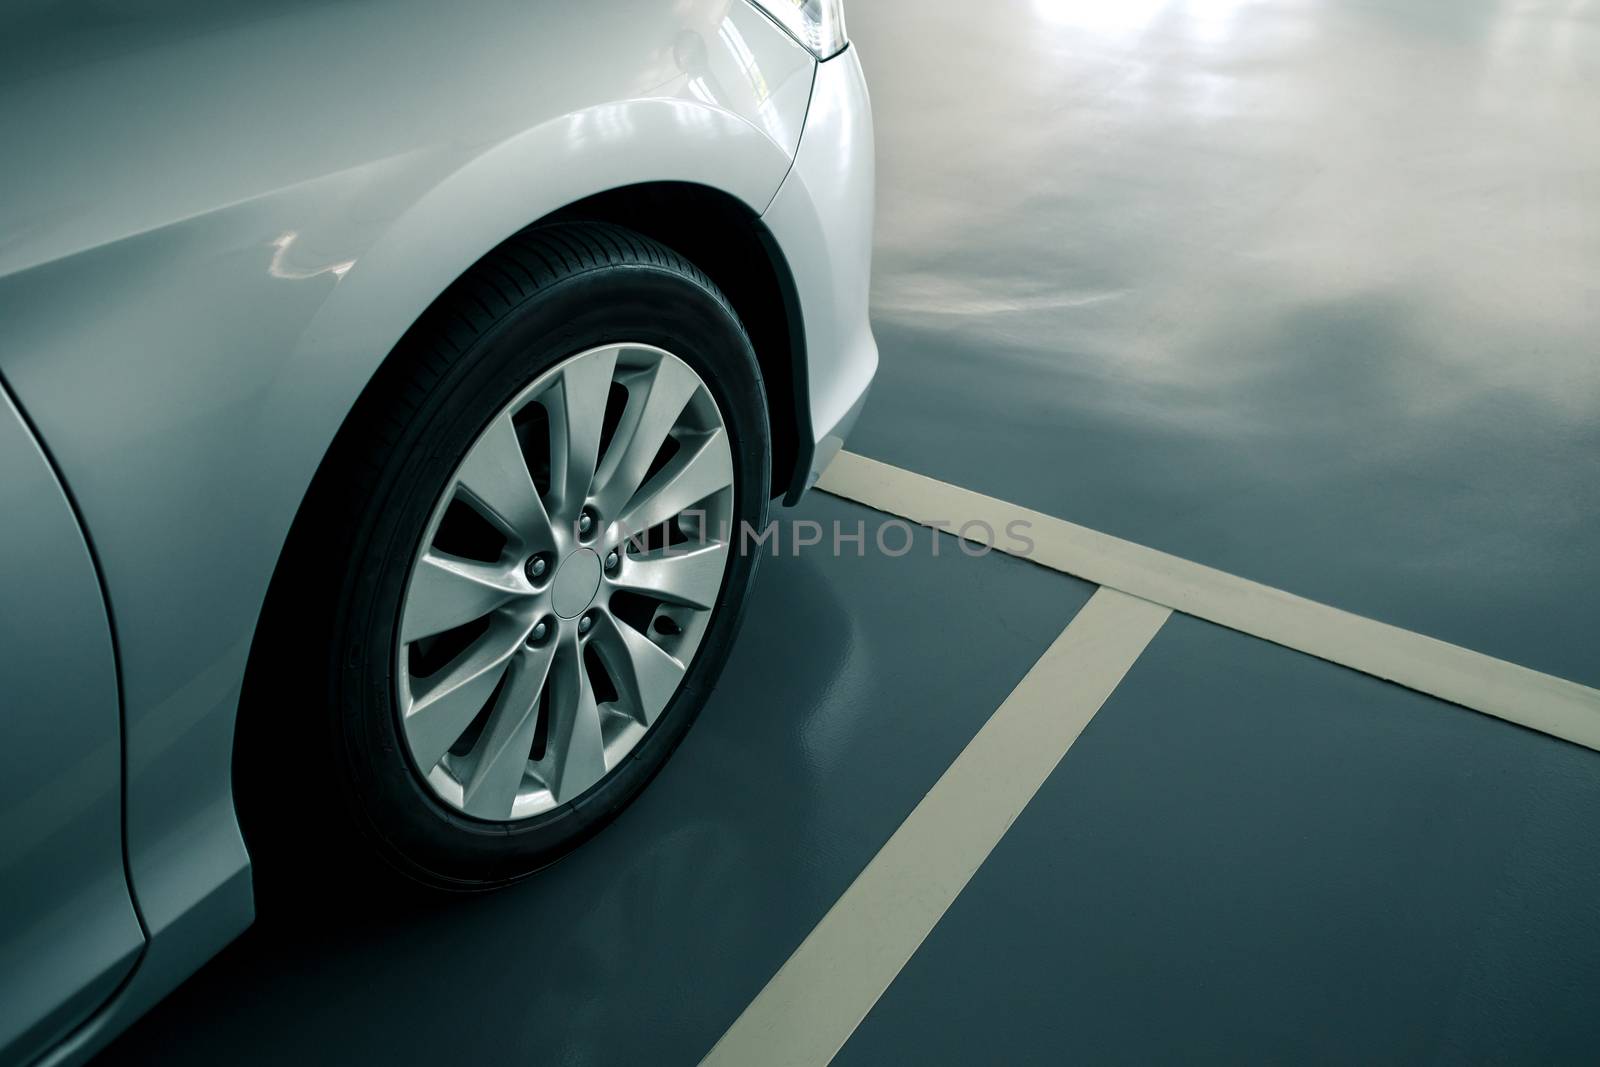 close up of modern car in parking lot, anti slip coating floor for safety, car parked in the right position in modern building carpark area